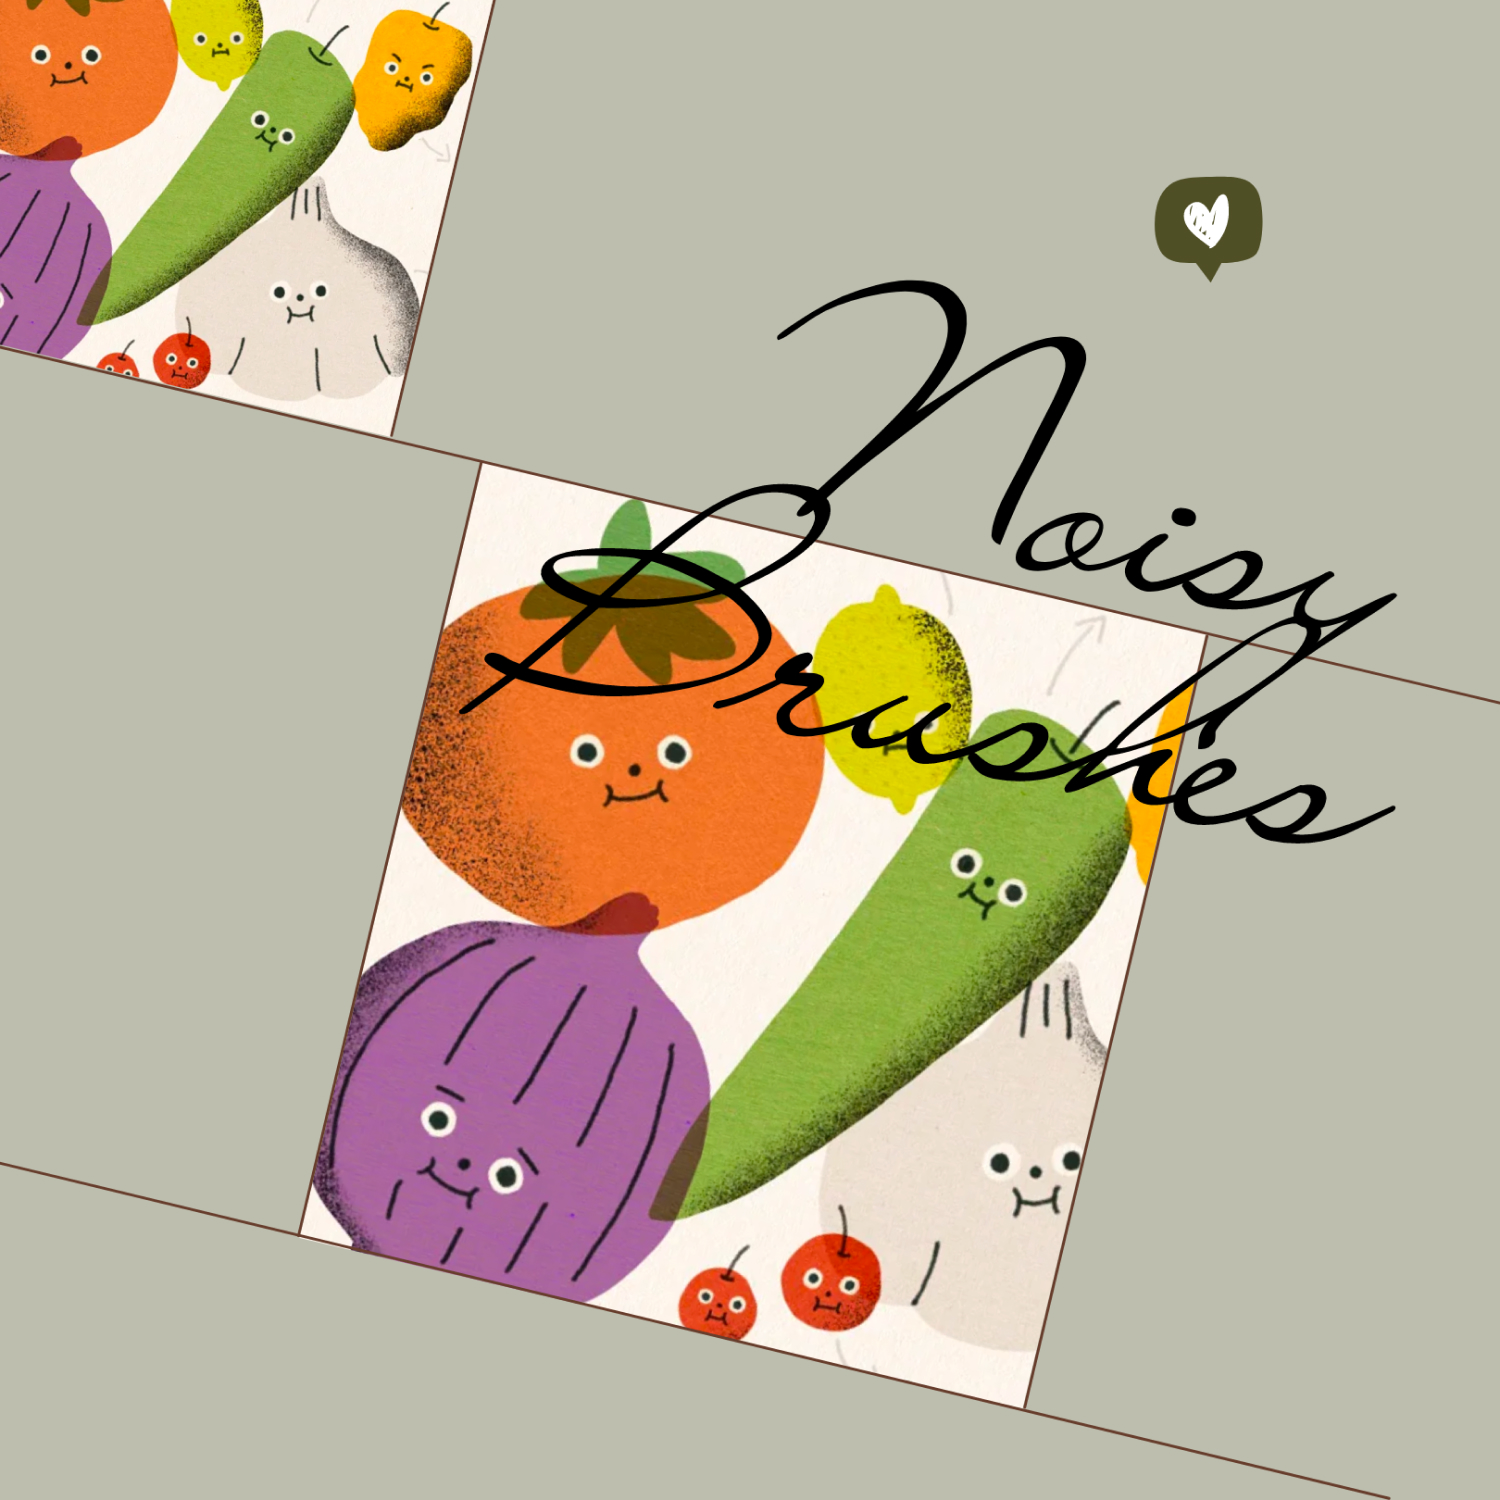 Drawn vegetables on a white background.